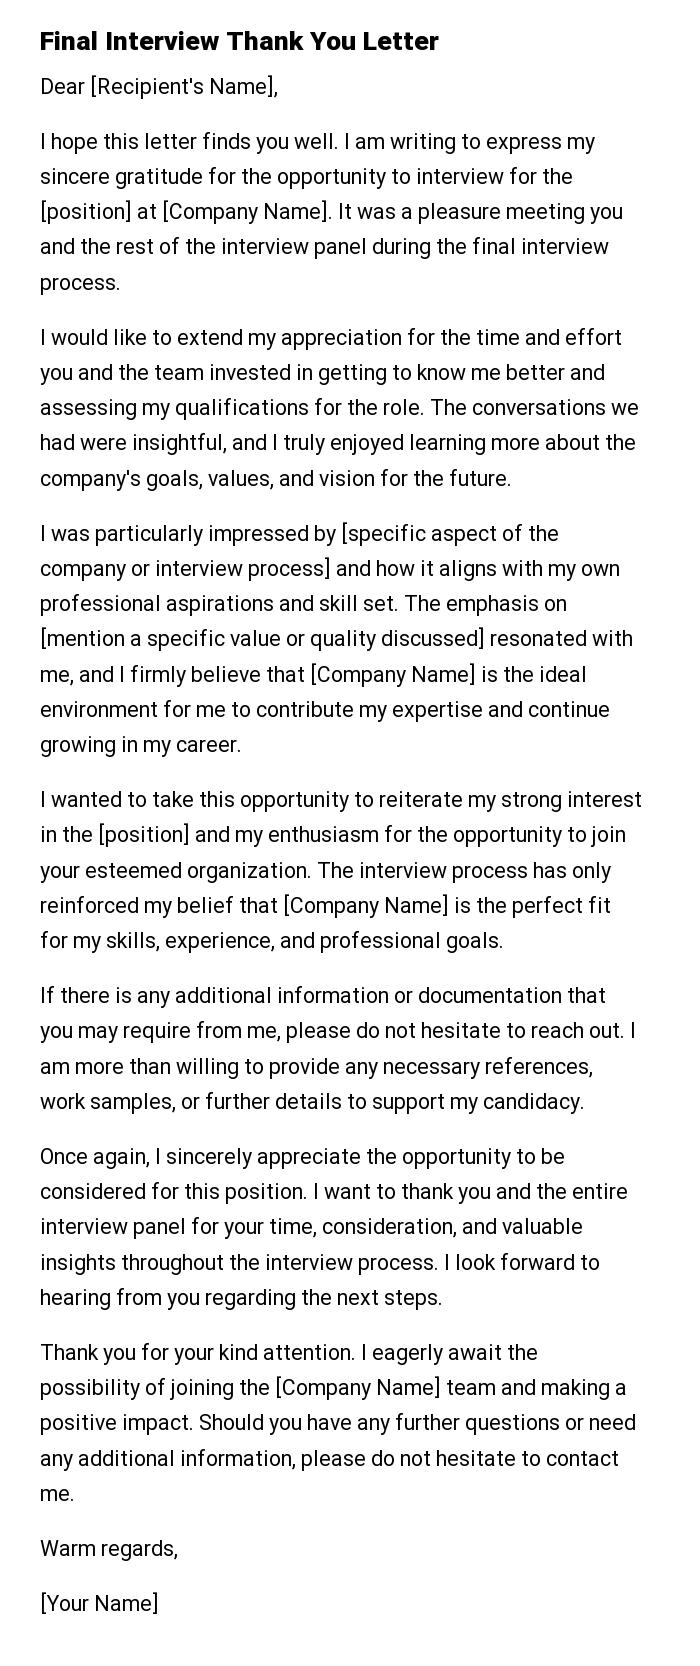 Final Interview Thank You Letter